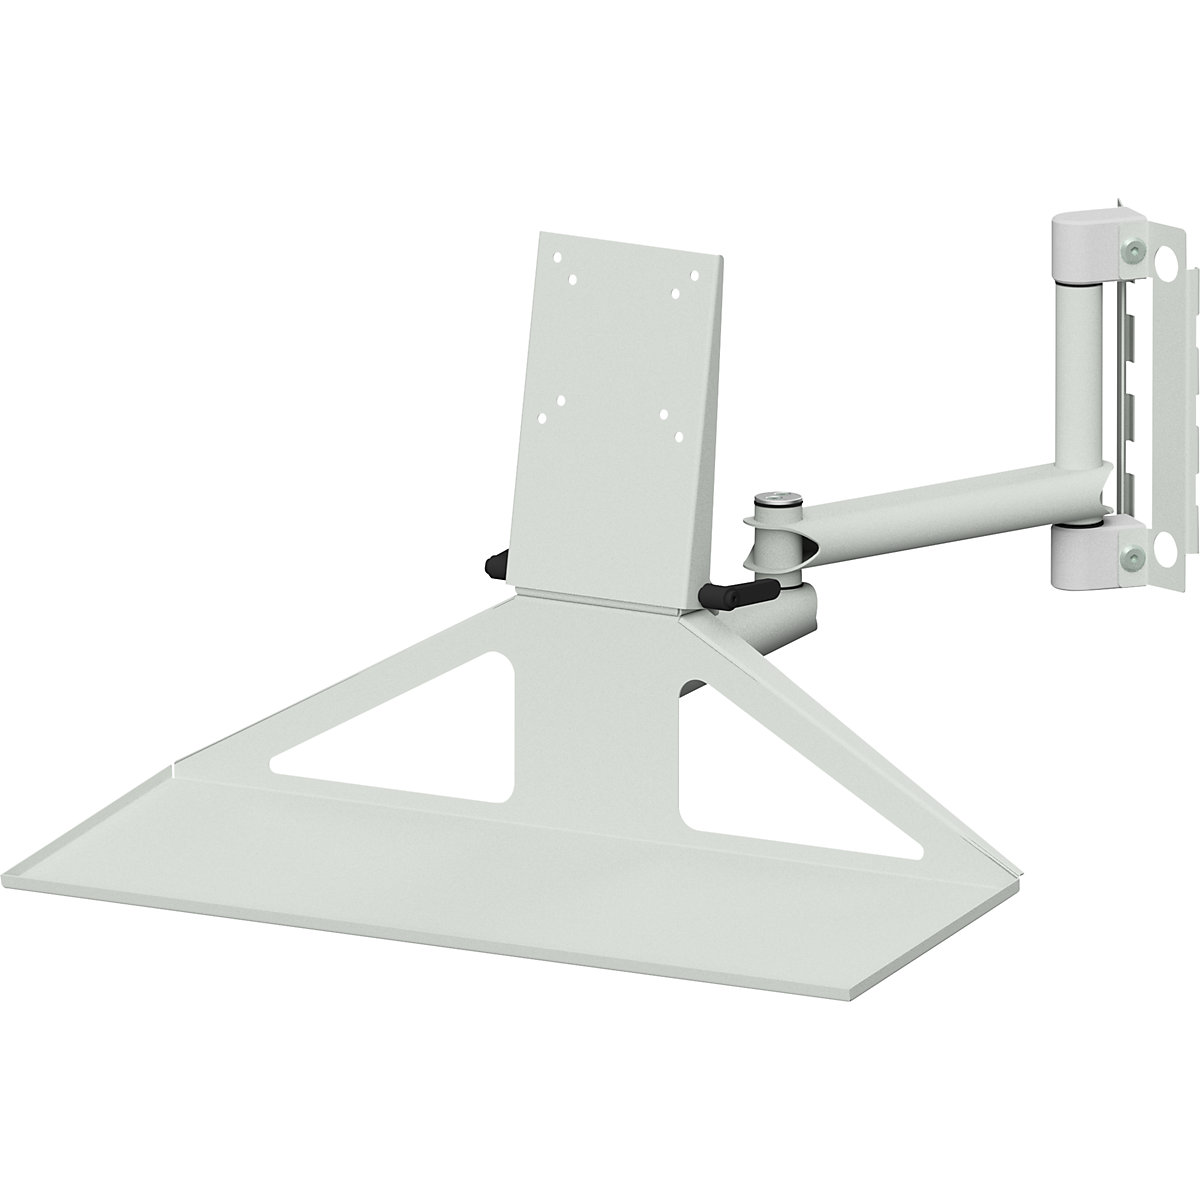 Swivel arm for electrically height adjustable LIFT work tables - ANKE